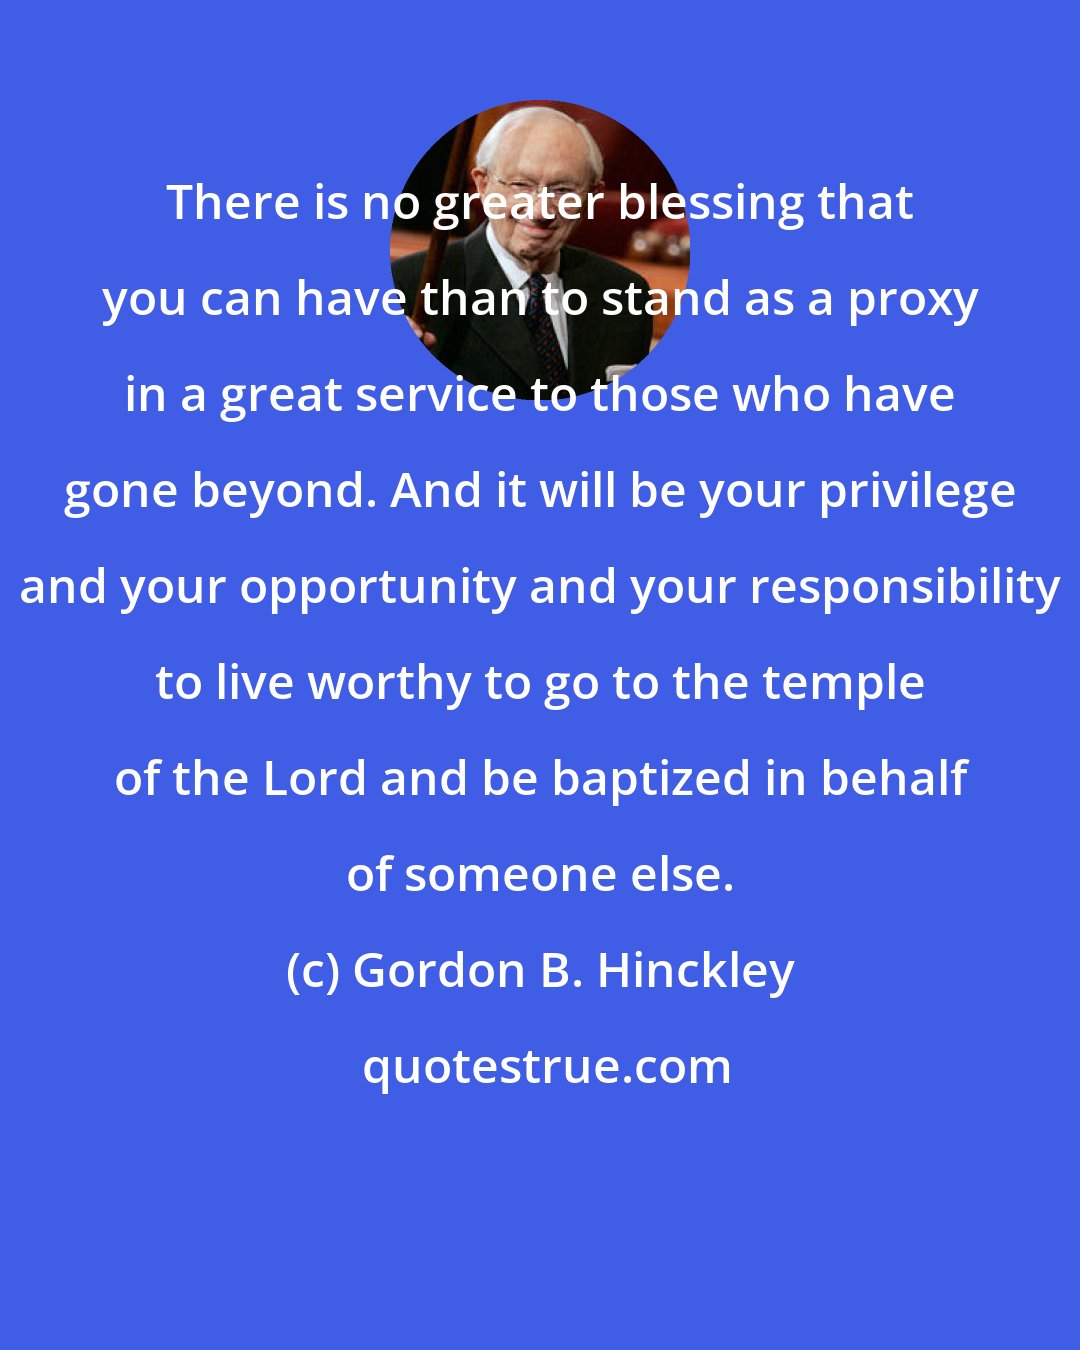 Gordon B. Hinckley: There is no greater blessing that you can have than to stand as a proxy in a great service to those who have gone beyond. And it will be your privilege and your opportunity and your responsibility to live worthy to go to the temple of the Lord and be baptized in behalf of someone else.